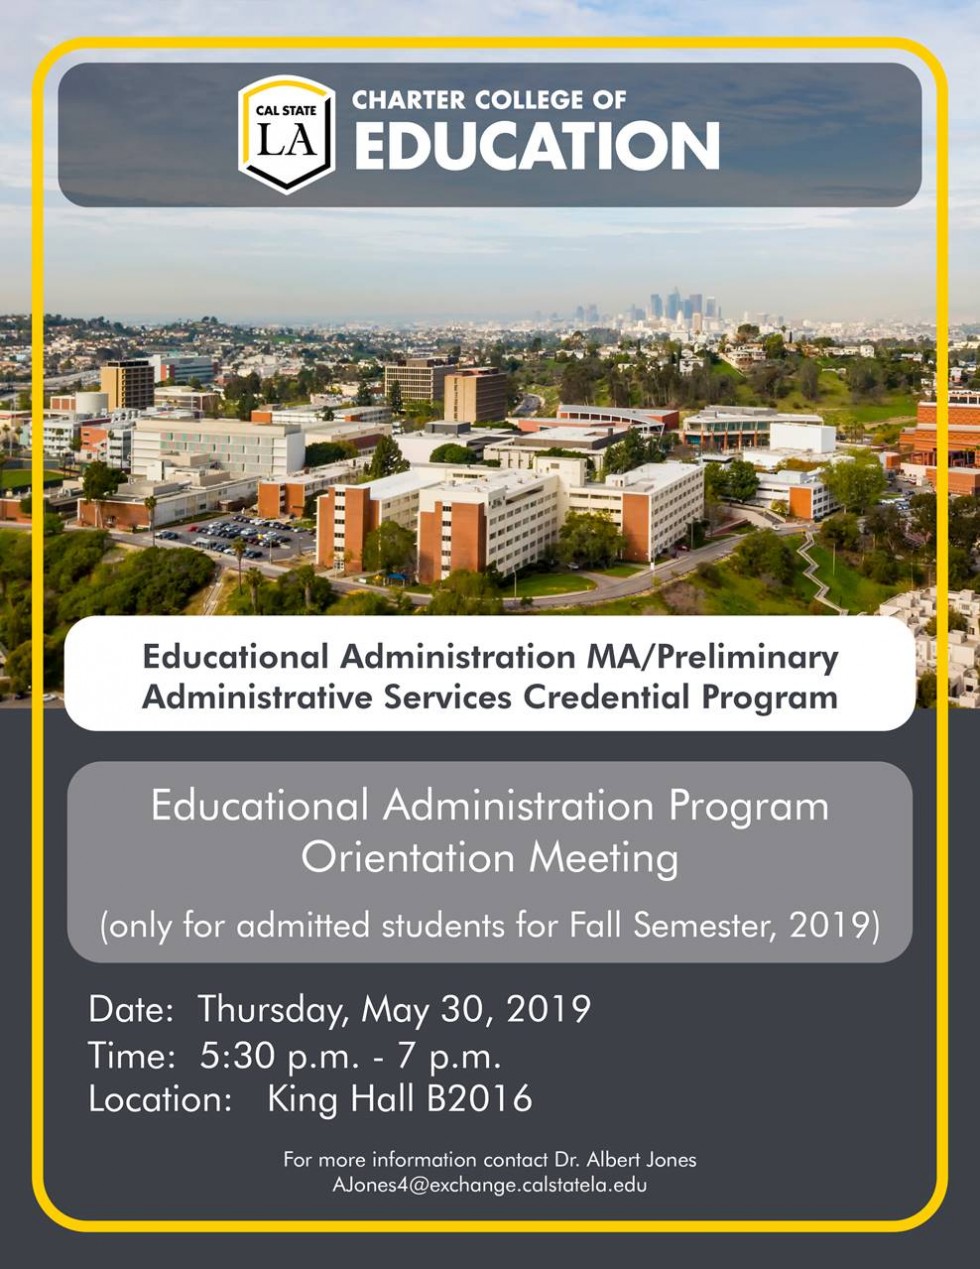 Educational Administration Orientation Meeting